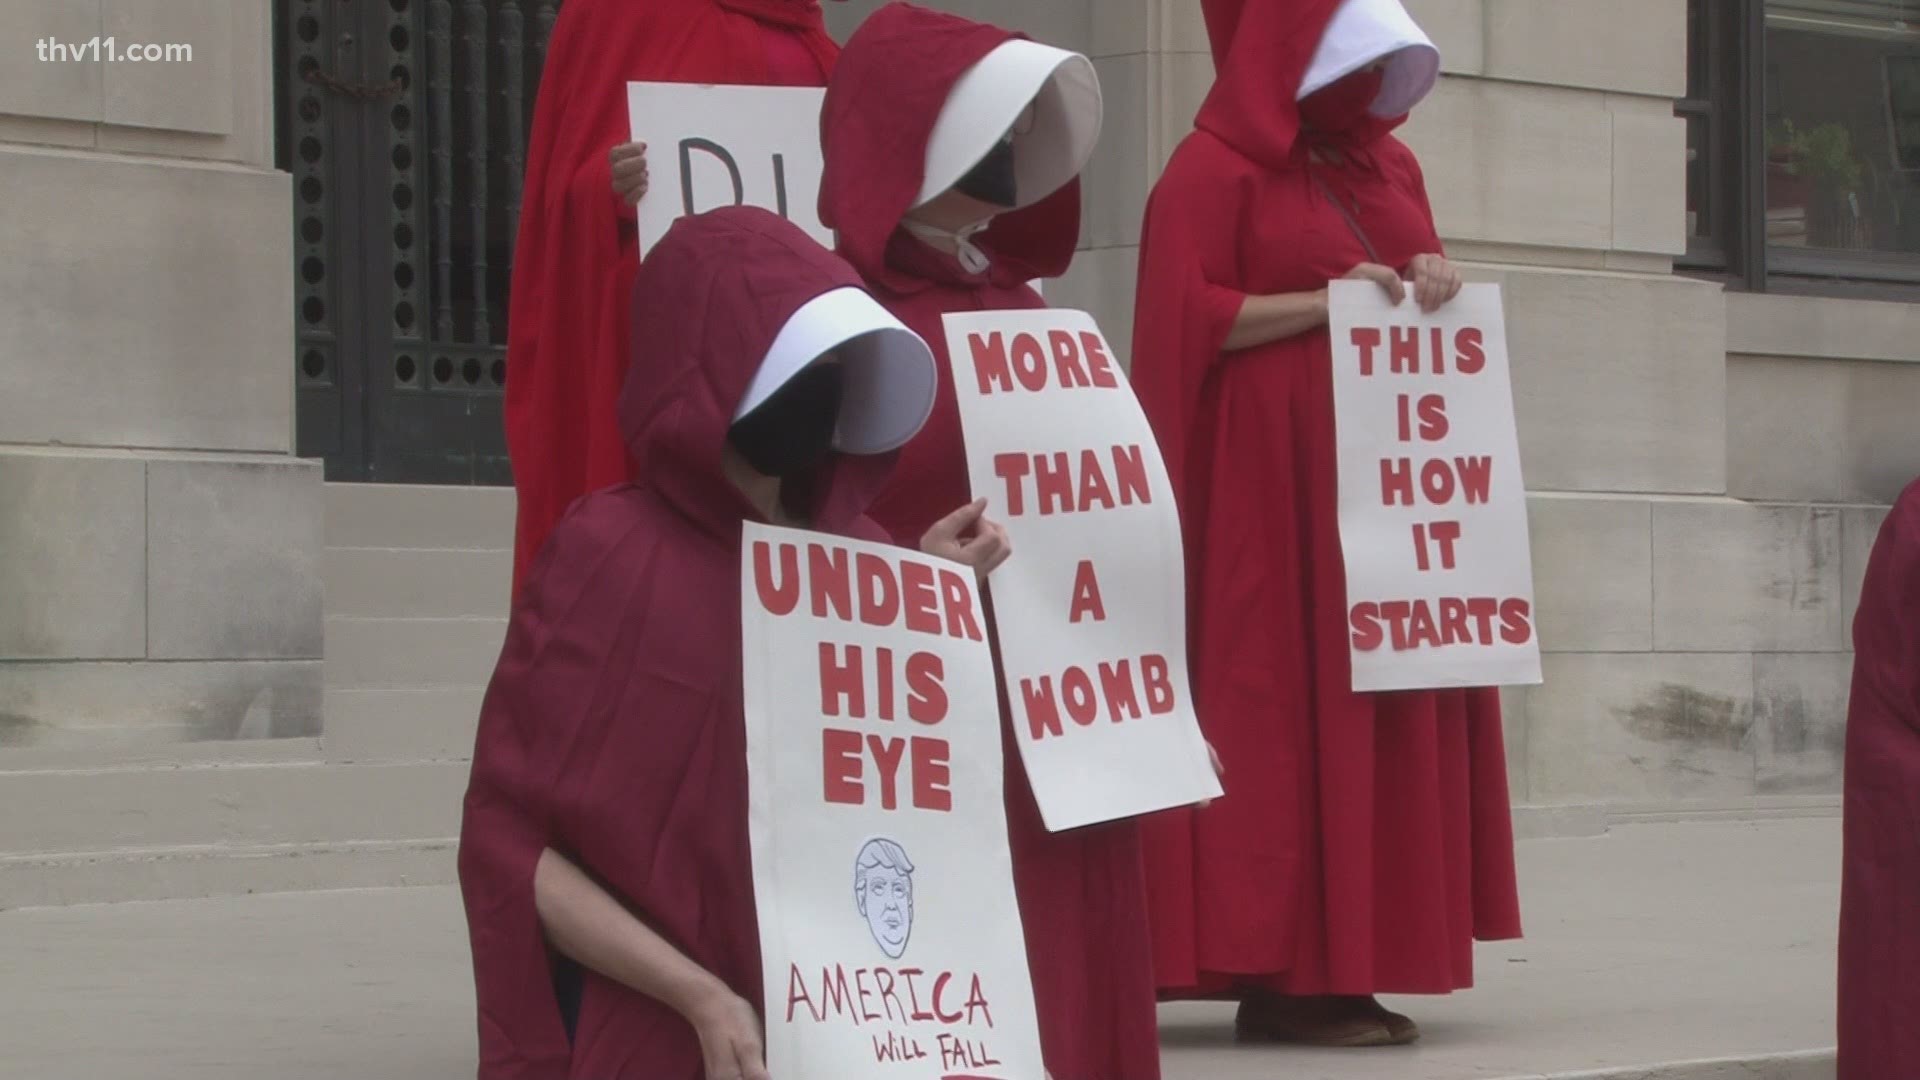 Members of the "Red Cloaks" protest group for women's rights held a demonstration outside of the Pulaski County Courthouse.